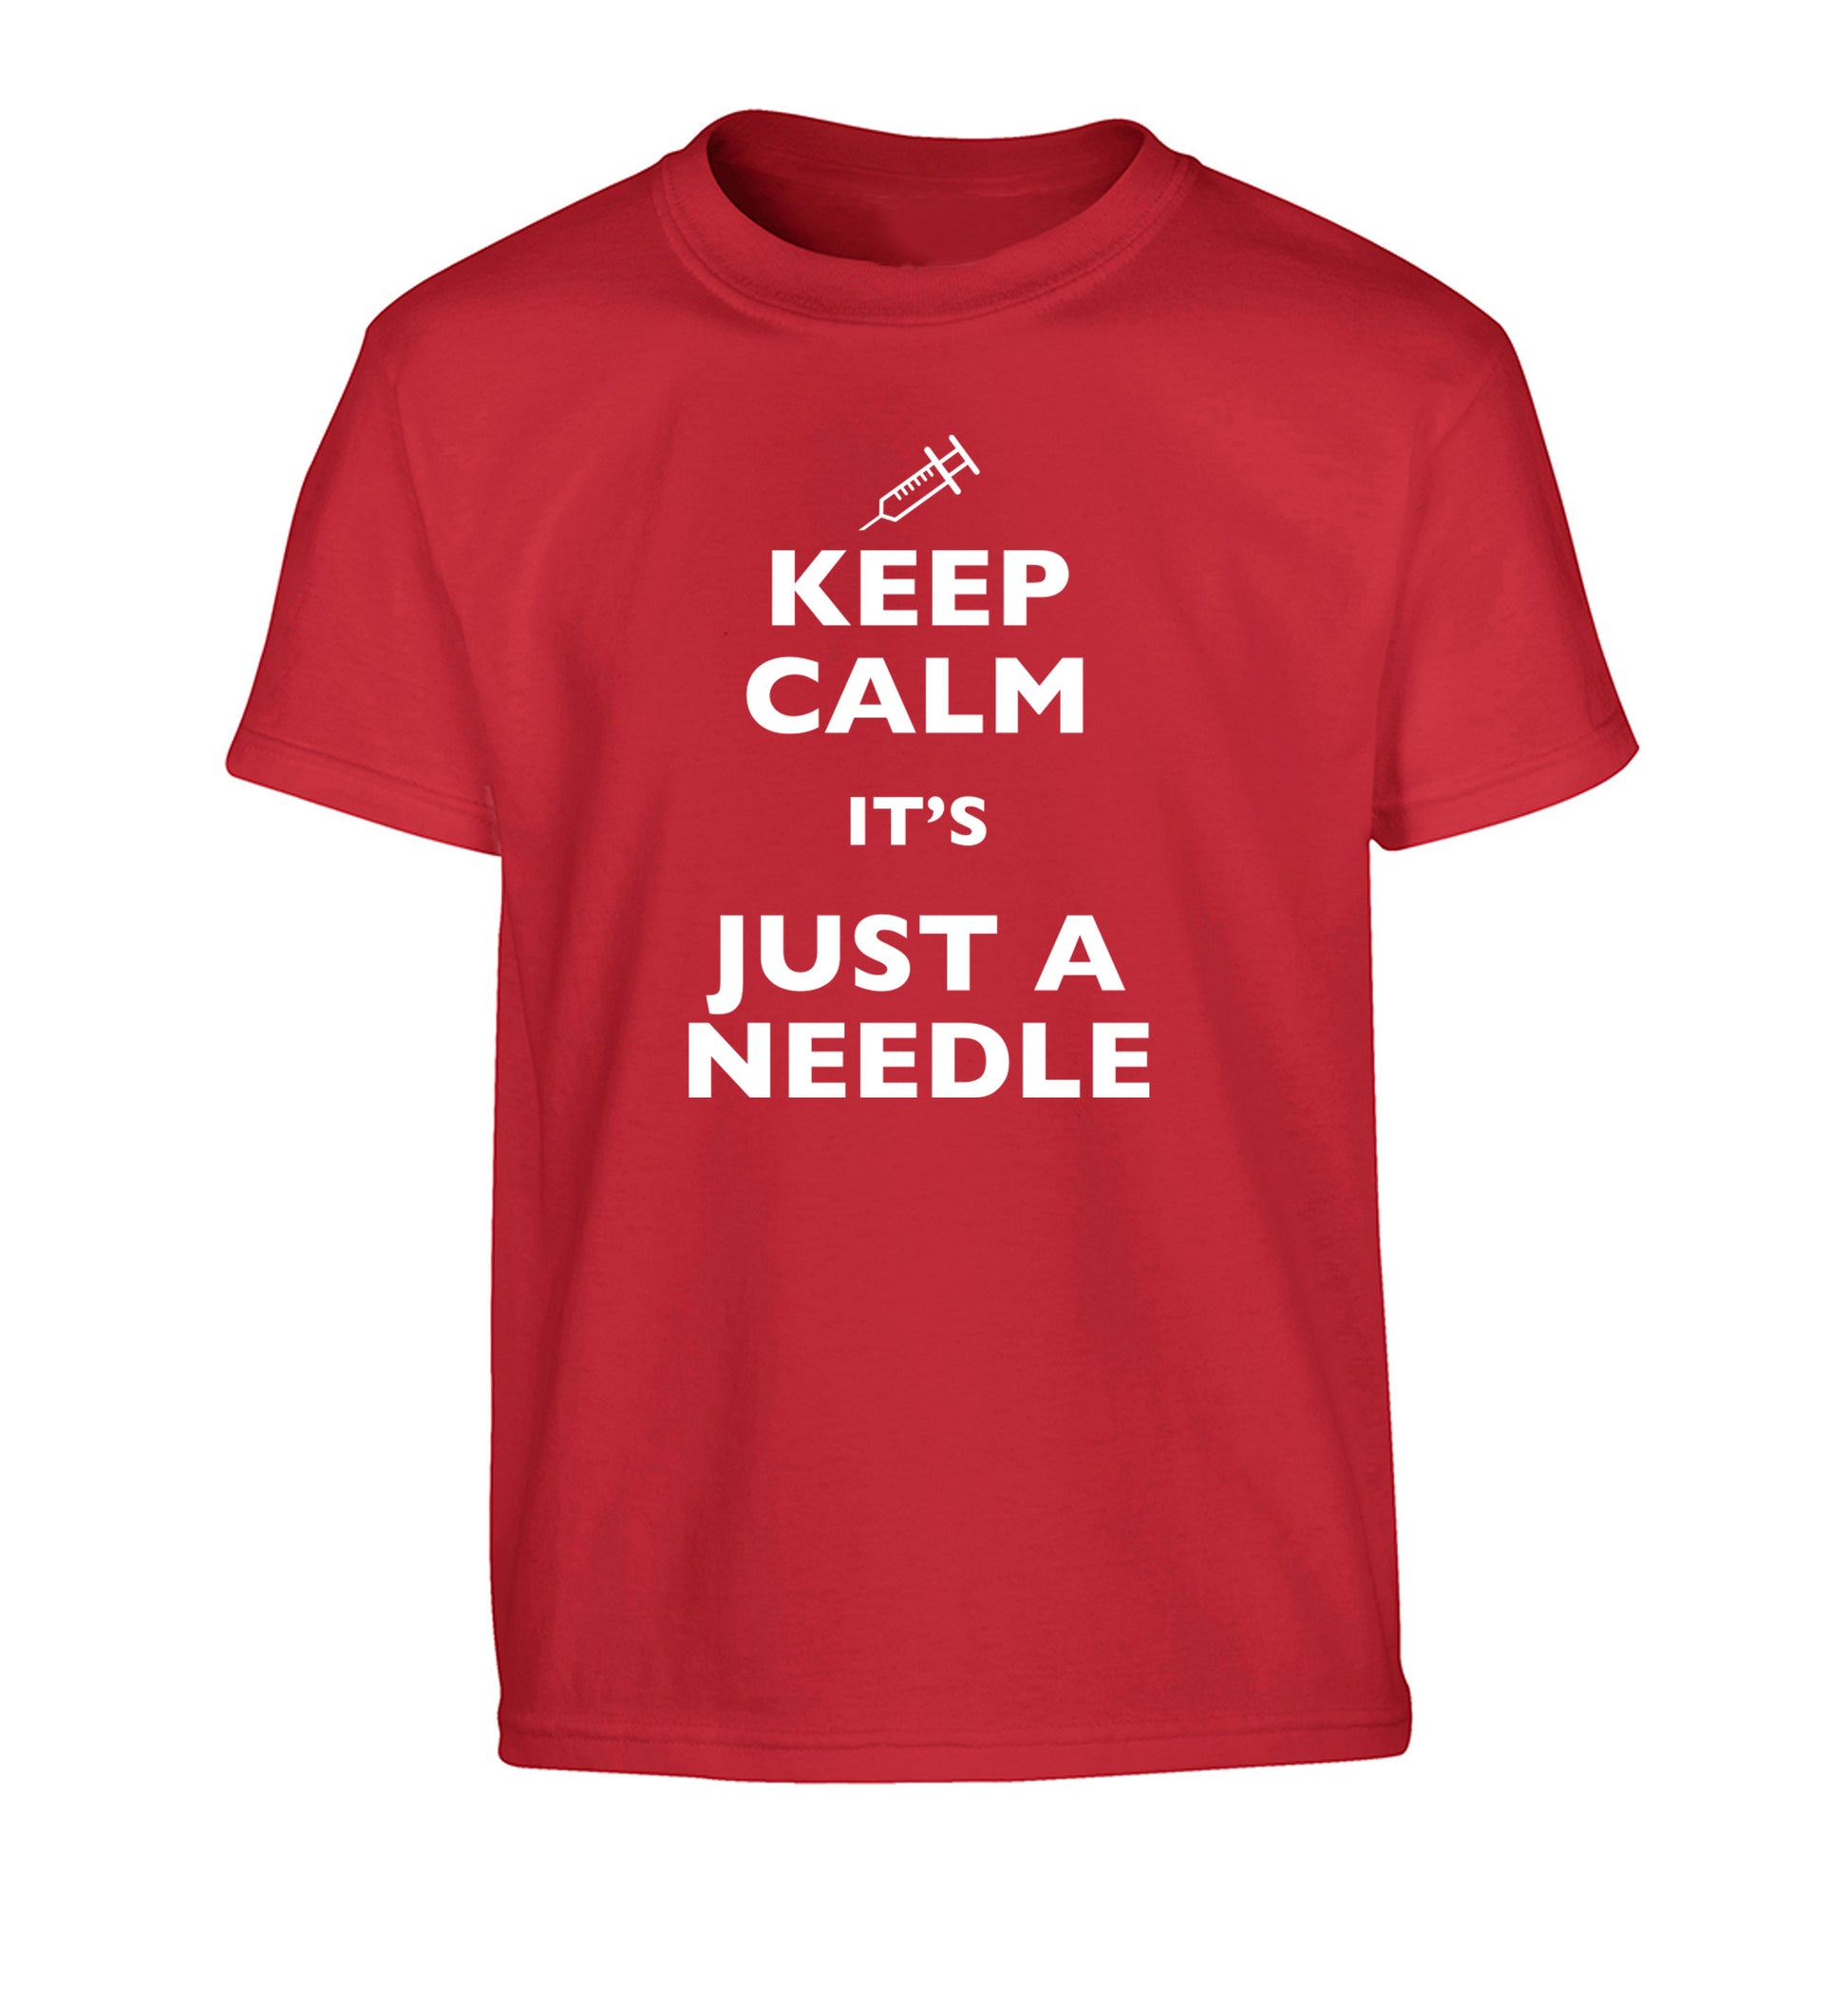 Keep calm it's only a needle Children's red Tshirt 12-14 Years